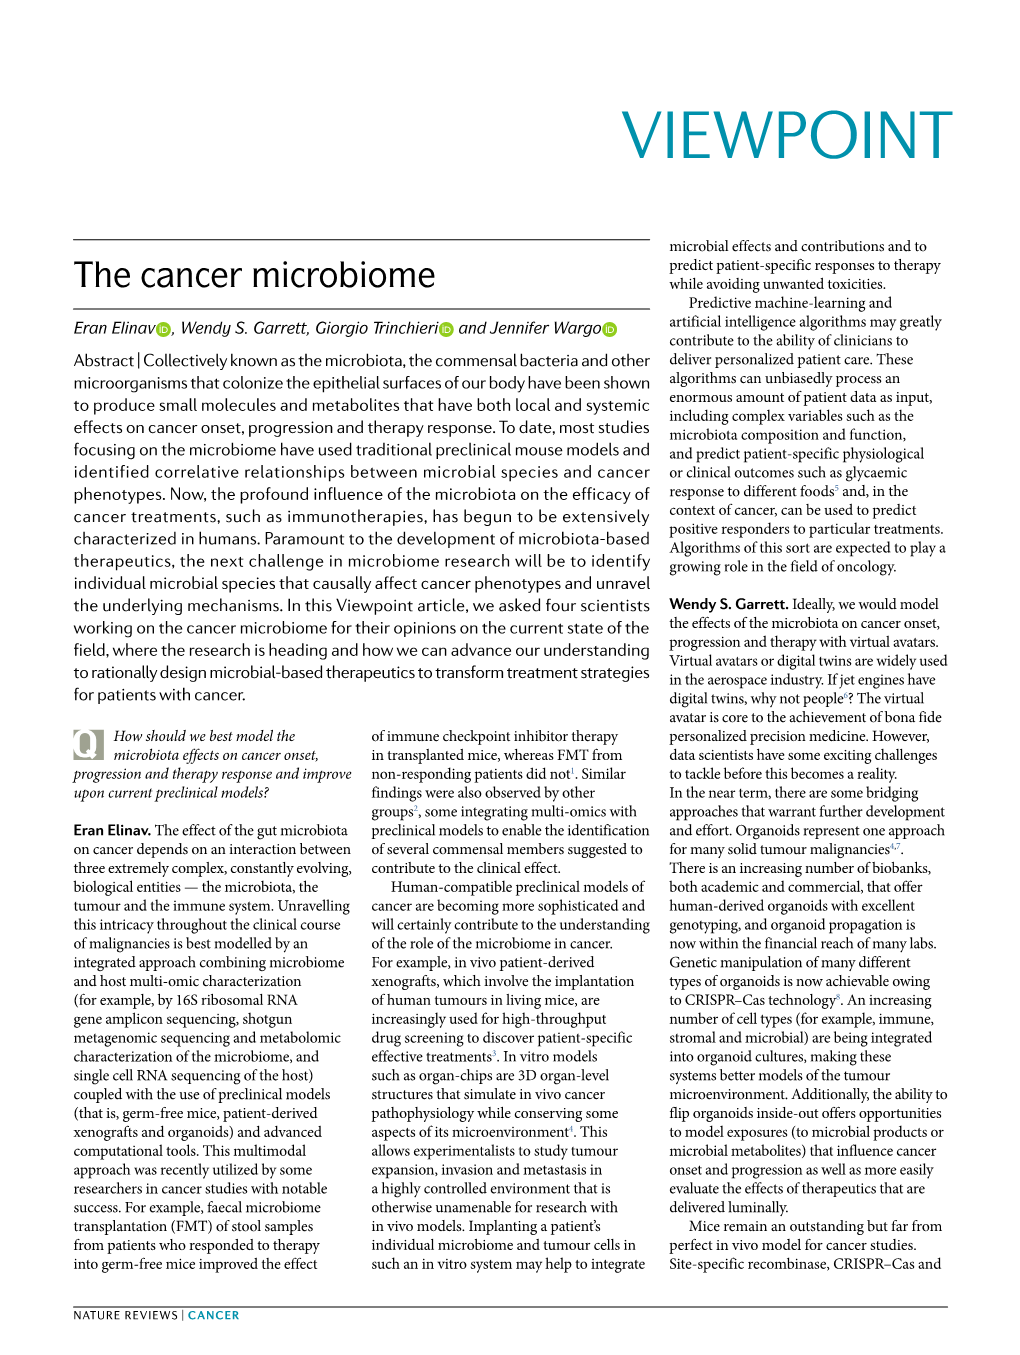 The Cancer Microbiome While Avoiding Unwanted Toxicities